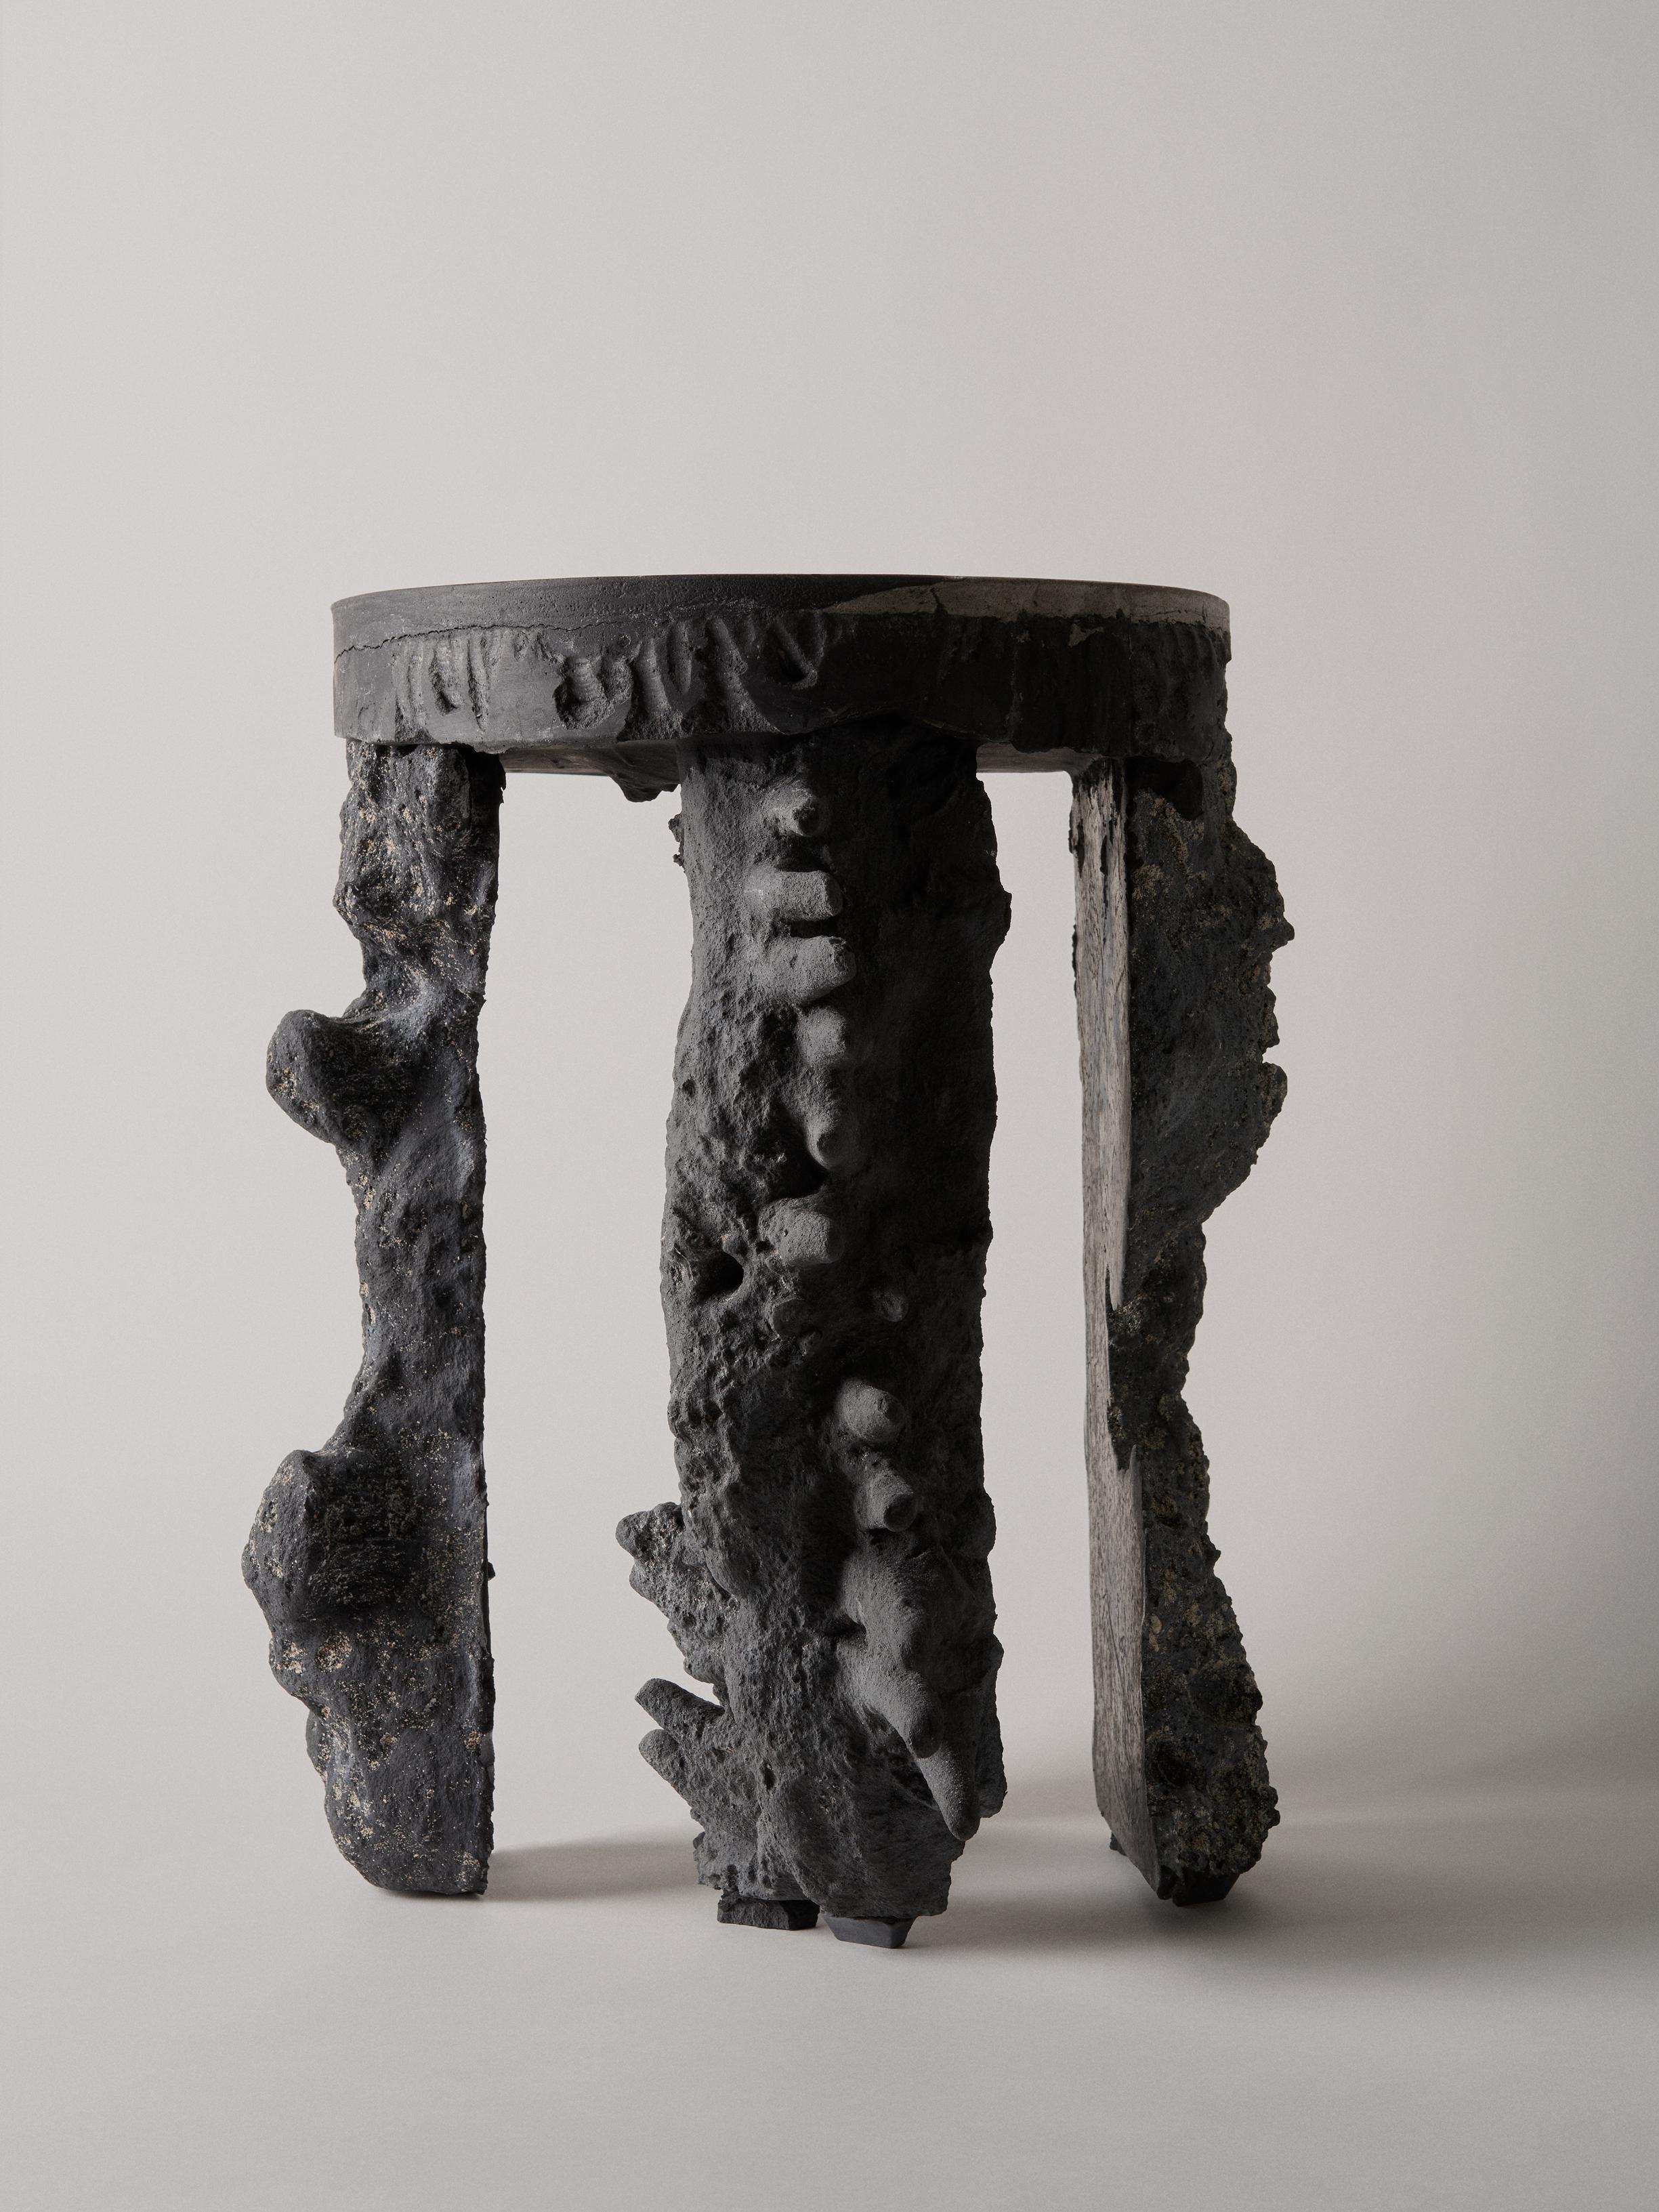 Four elements pedestal by Kajsa Melchior
Fictive Erosion collection
Dimensions: H approximate 45 cm
Ø approximaye 35 cm
Materials: Sculpted in sand by pressure from air, water and the human body
Developed in crystal, colored by coal
This piece